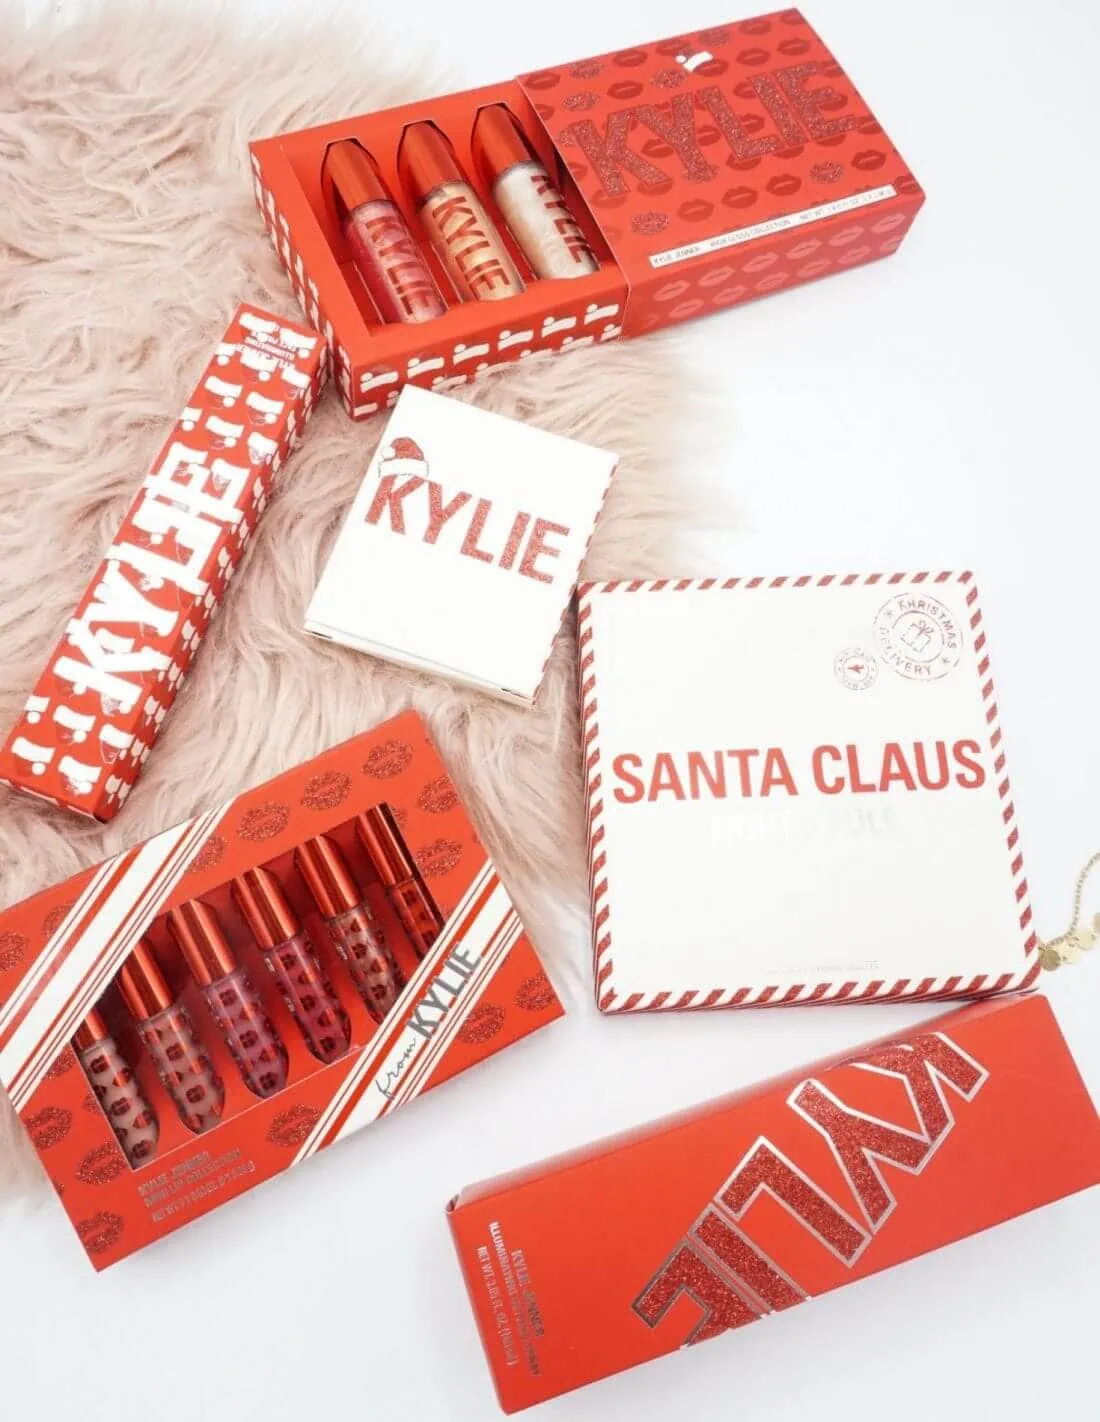 Kylie Cosmetics Holiday 2019 Collection